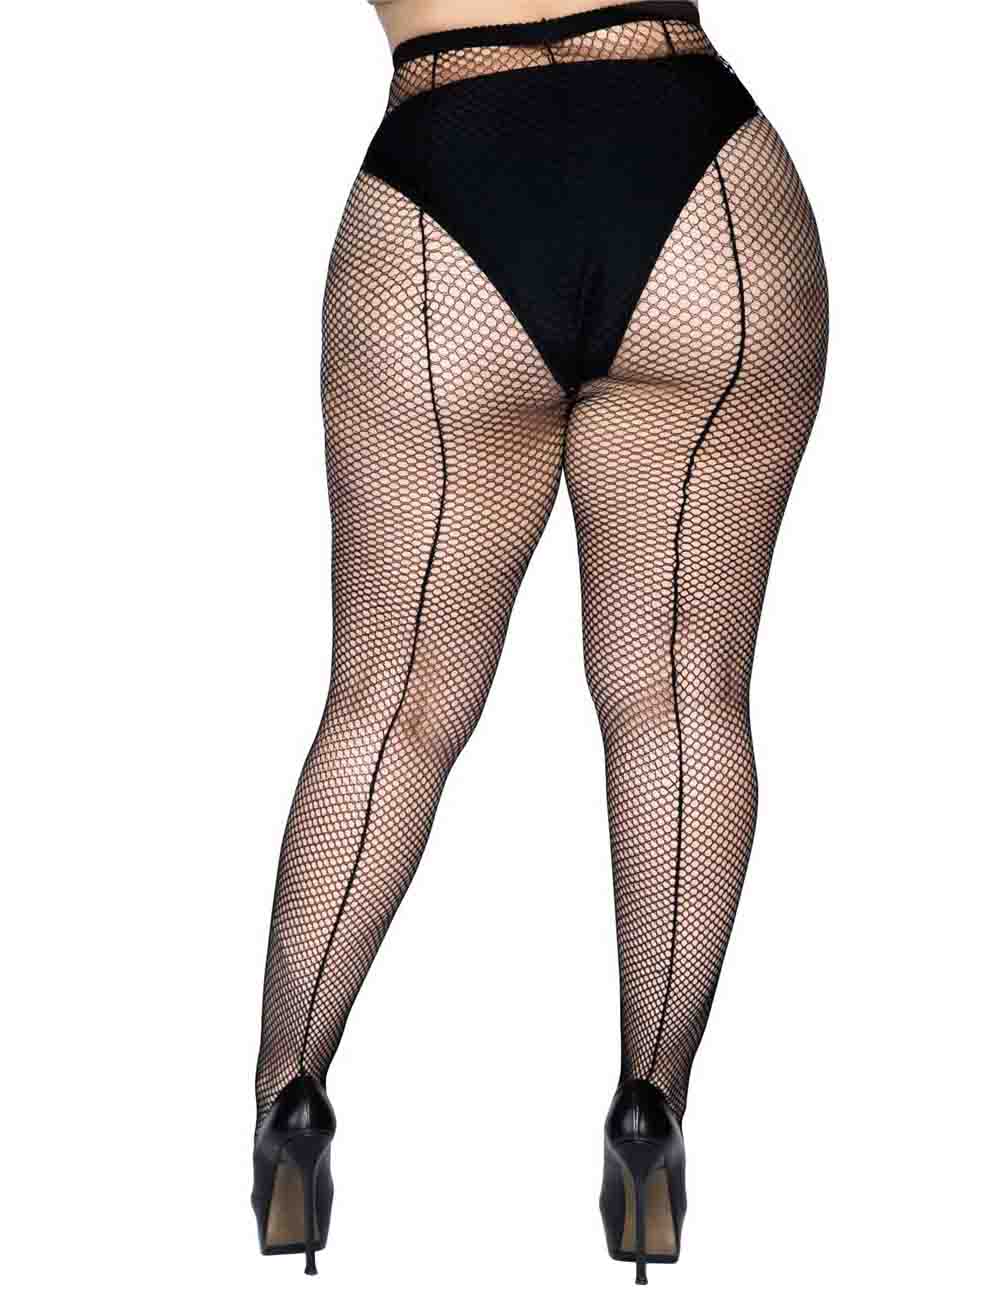 Leg Avenue 9015q Backseam Fishnet Pantyhose - Black plus size seamed net tights with a stripe / line up the back.